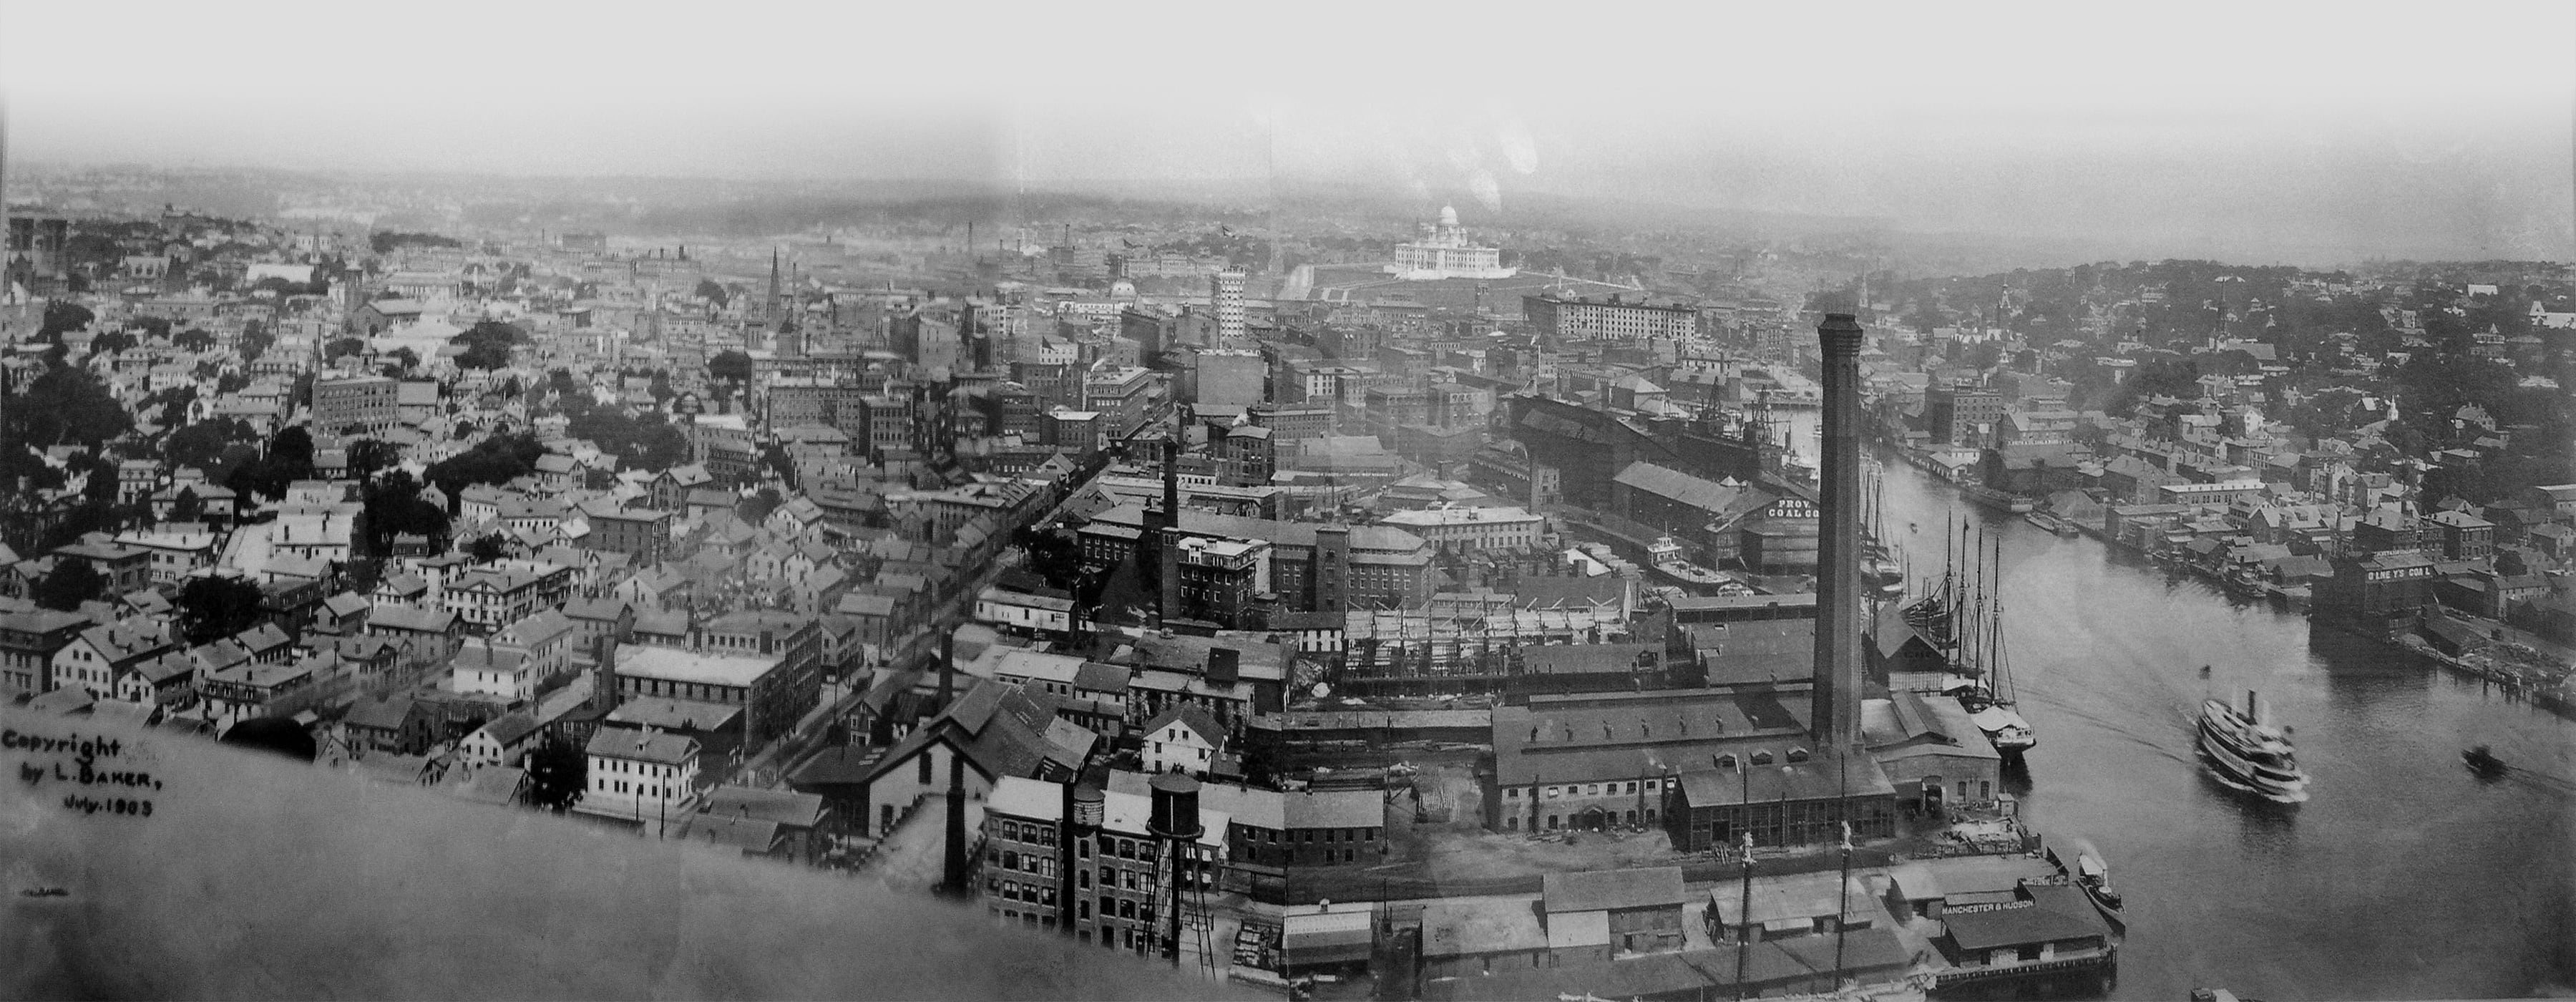 A wide panoramic black and white photo taken from a high vantage point looking north across the city of Providence at the turn of the 20th century. A dense Jewelry District is in the foreground, with the Providence River harbor on the right and the base of College Hill.